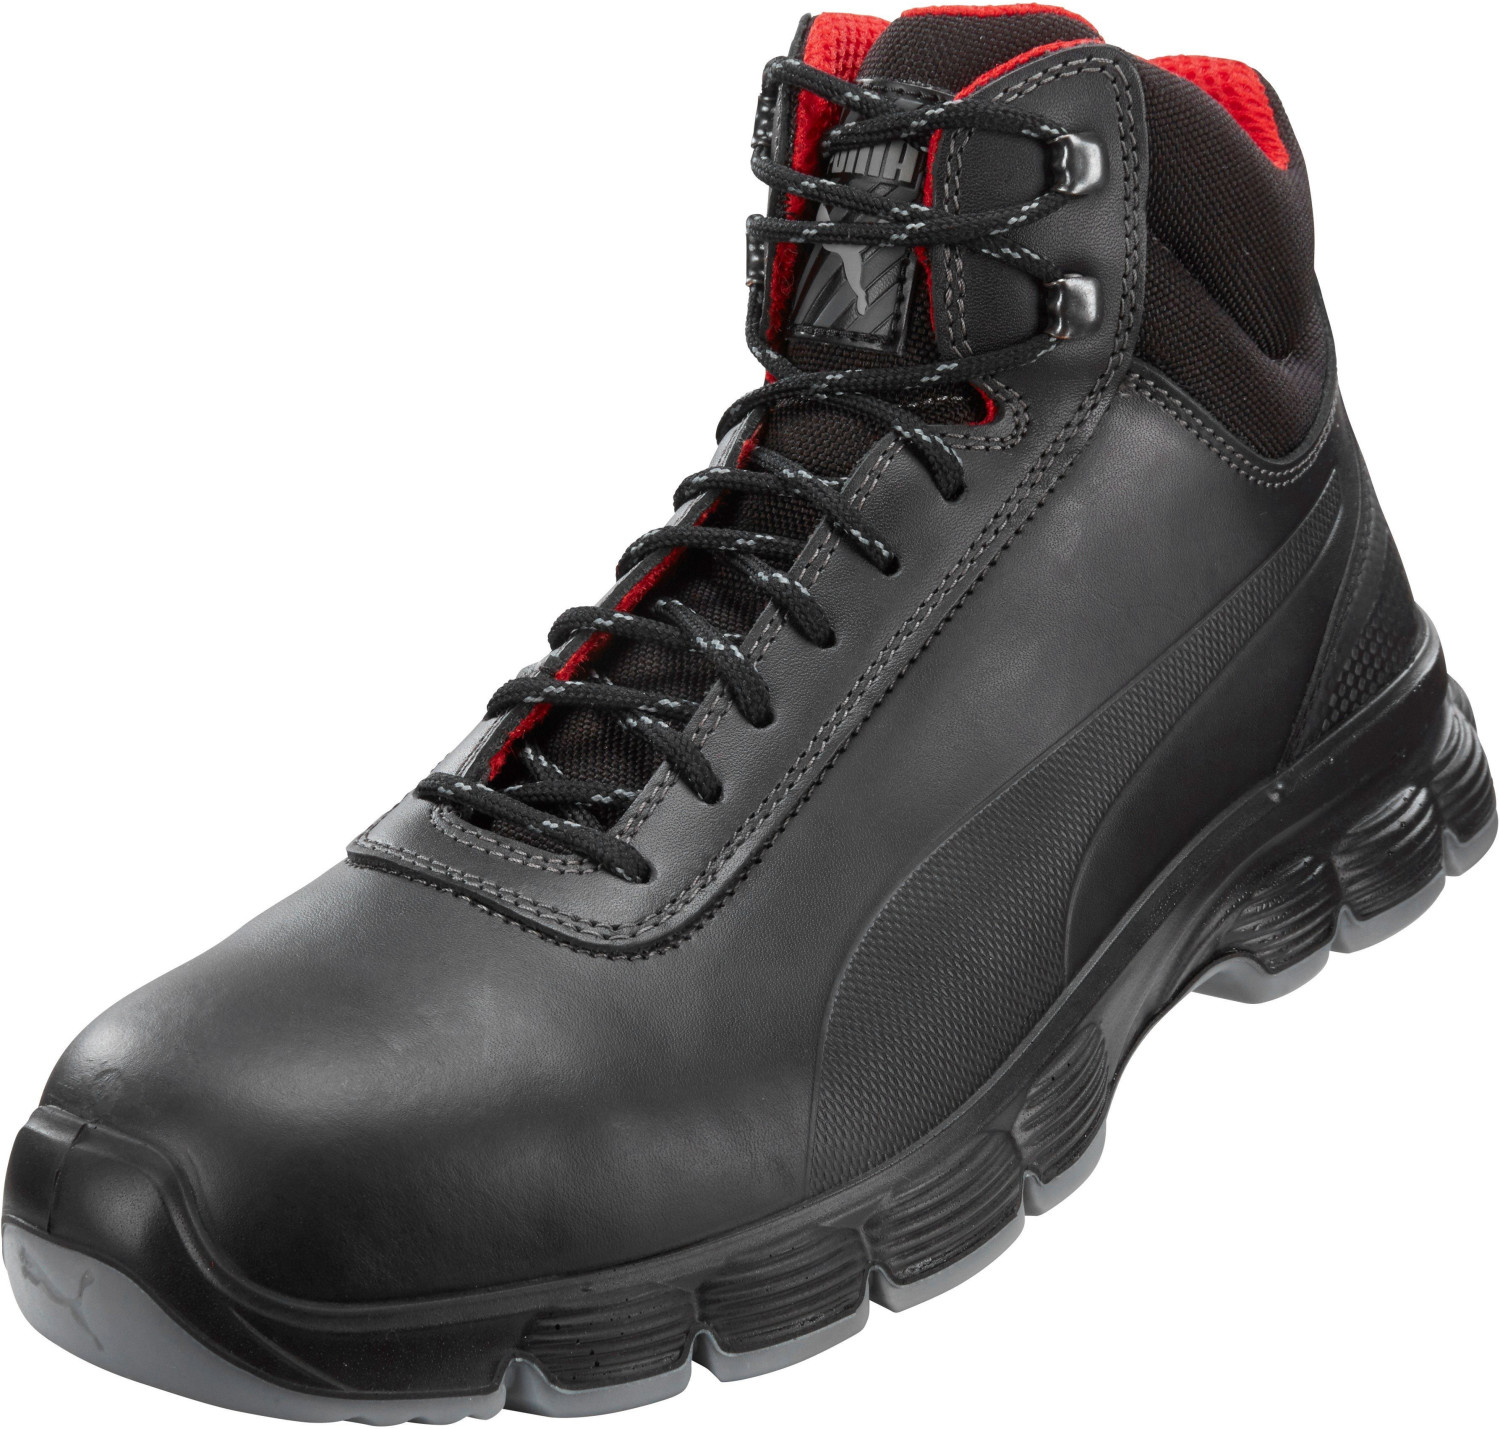 Safety black Buy Best from (630101) (Today) Pioneer on Mid Deals £84.95 – Puma